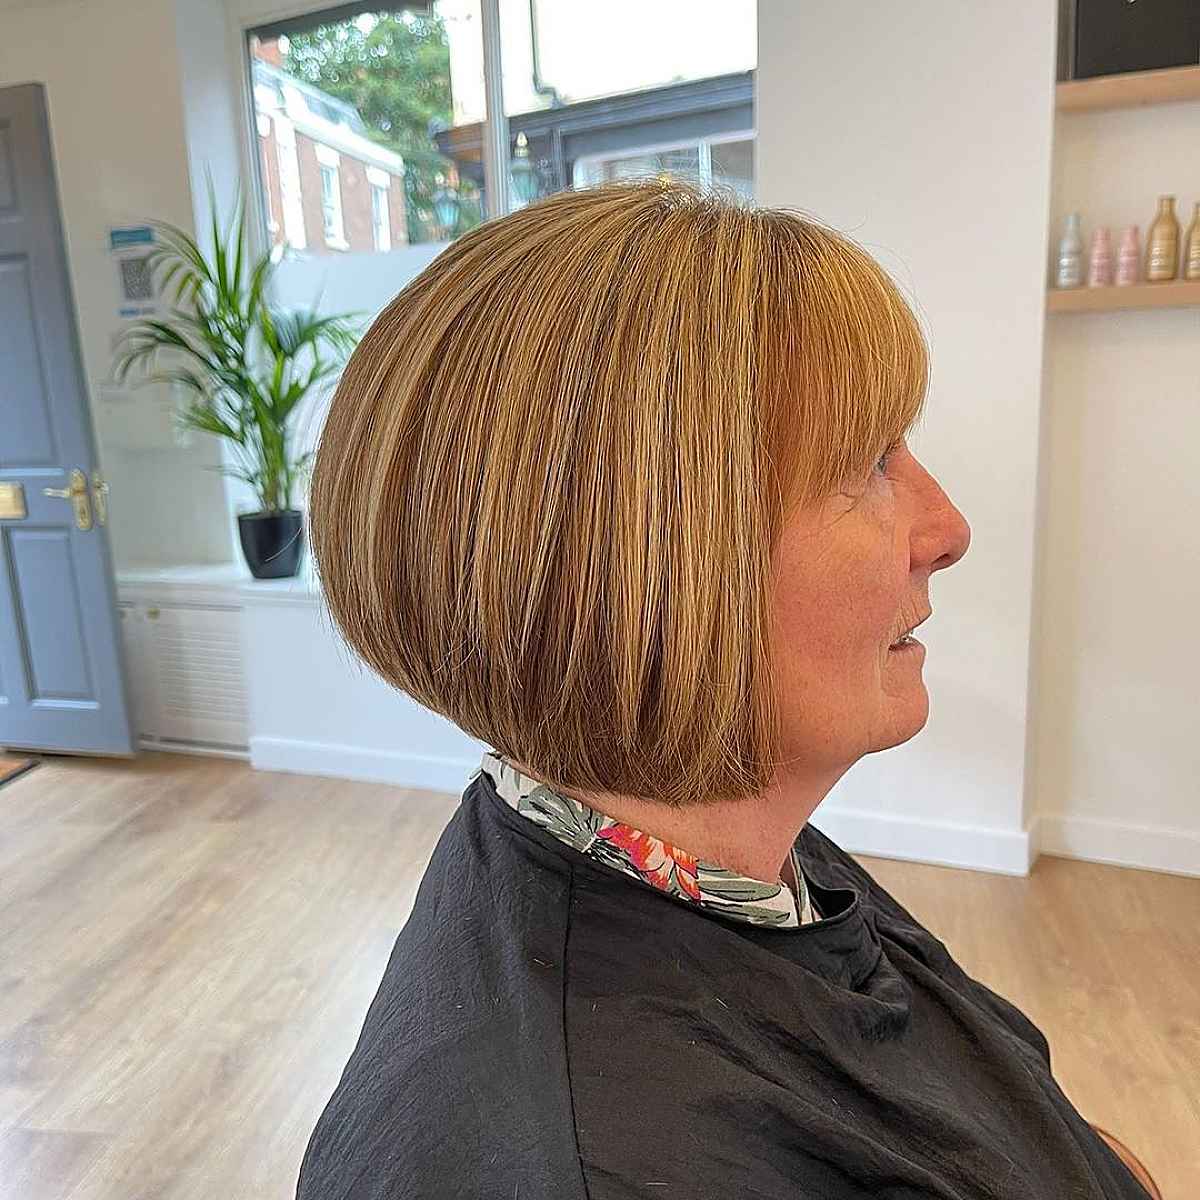 25 Stylish Wedge Haircuts for Women Over 60